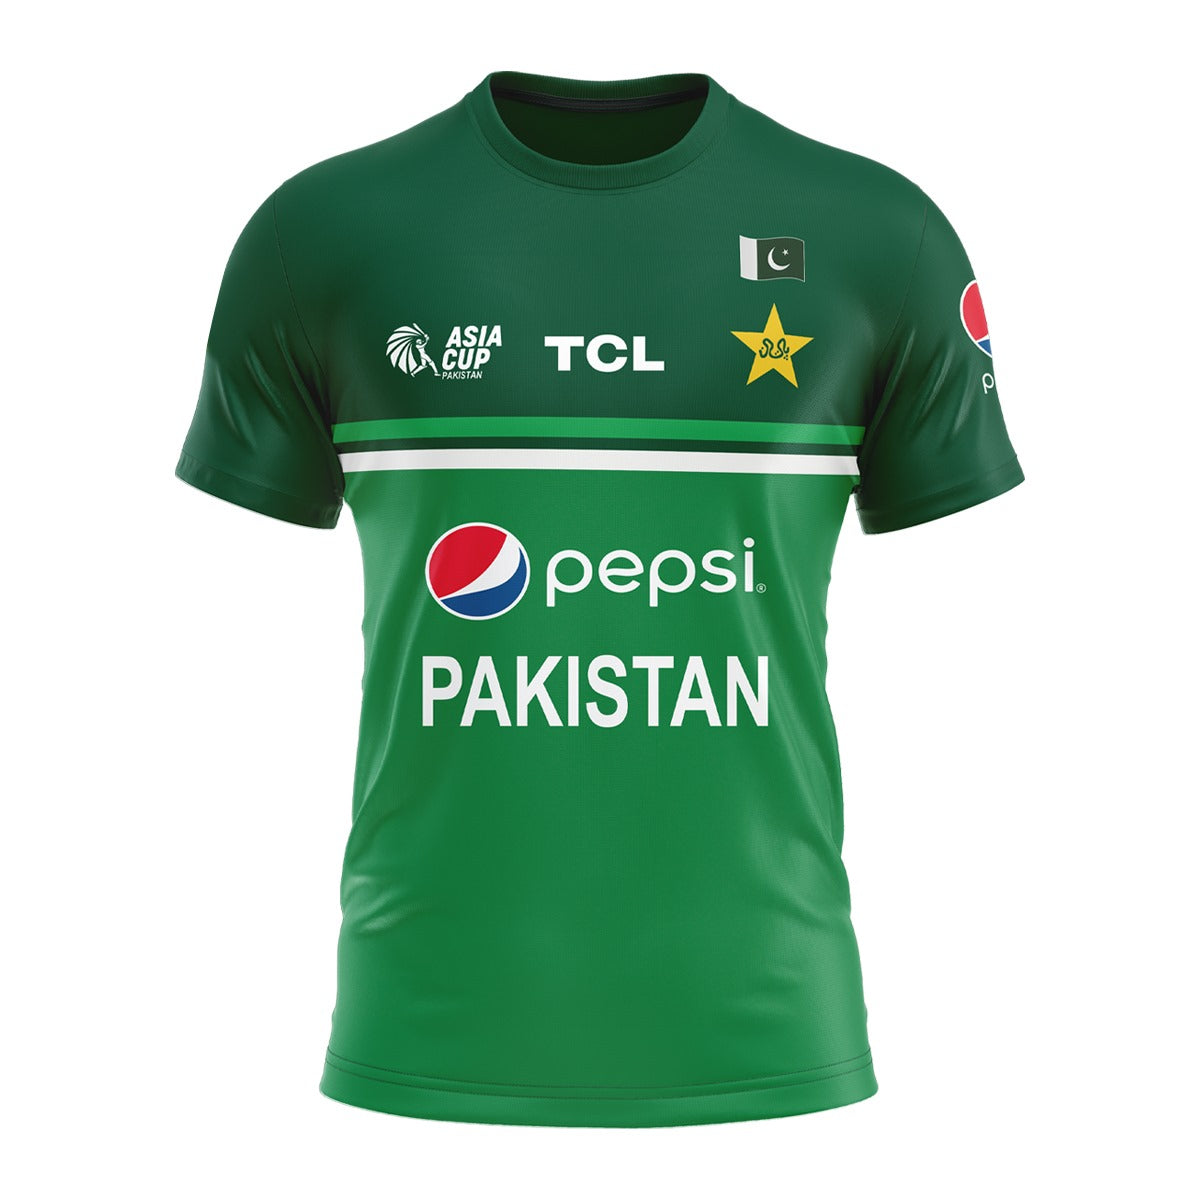 Pakistan's Asia Cup 2023 Team-Inspired Unisex T-Shirt